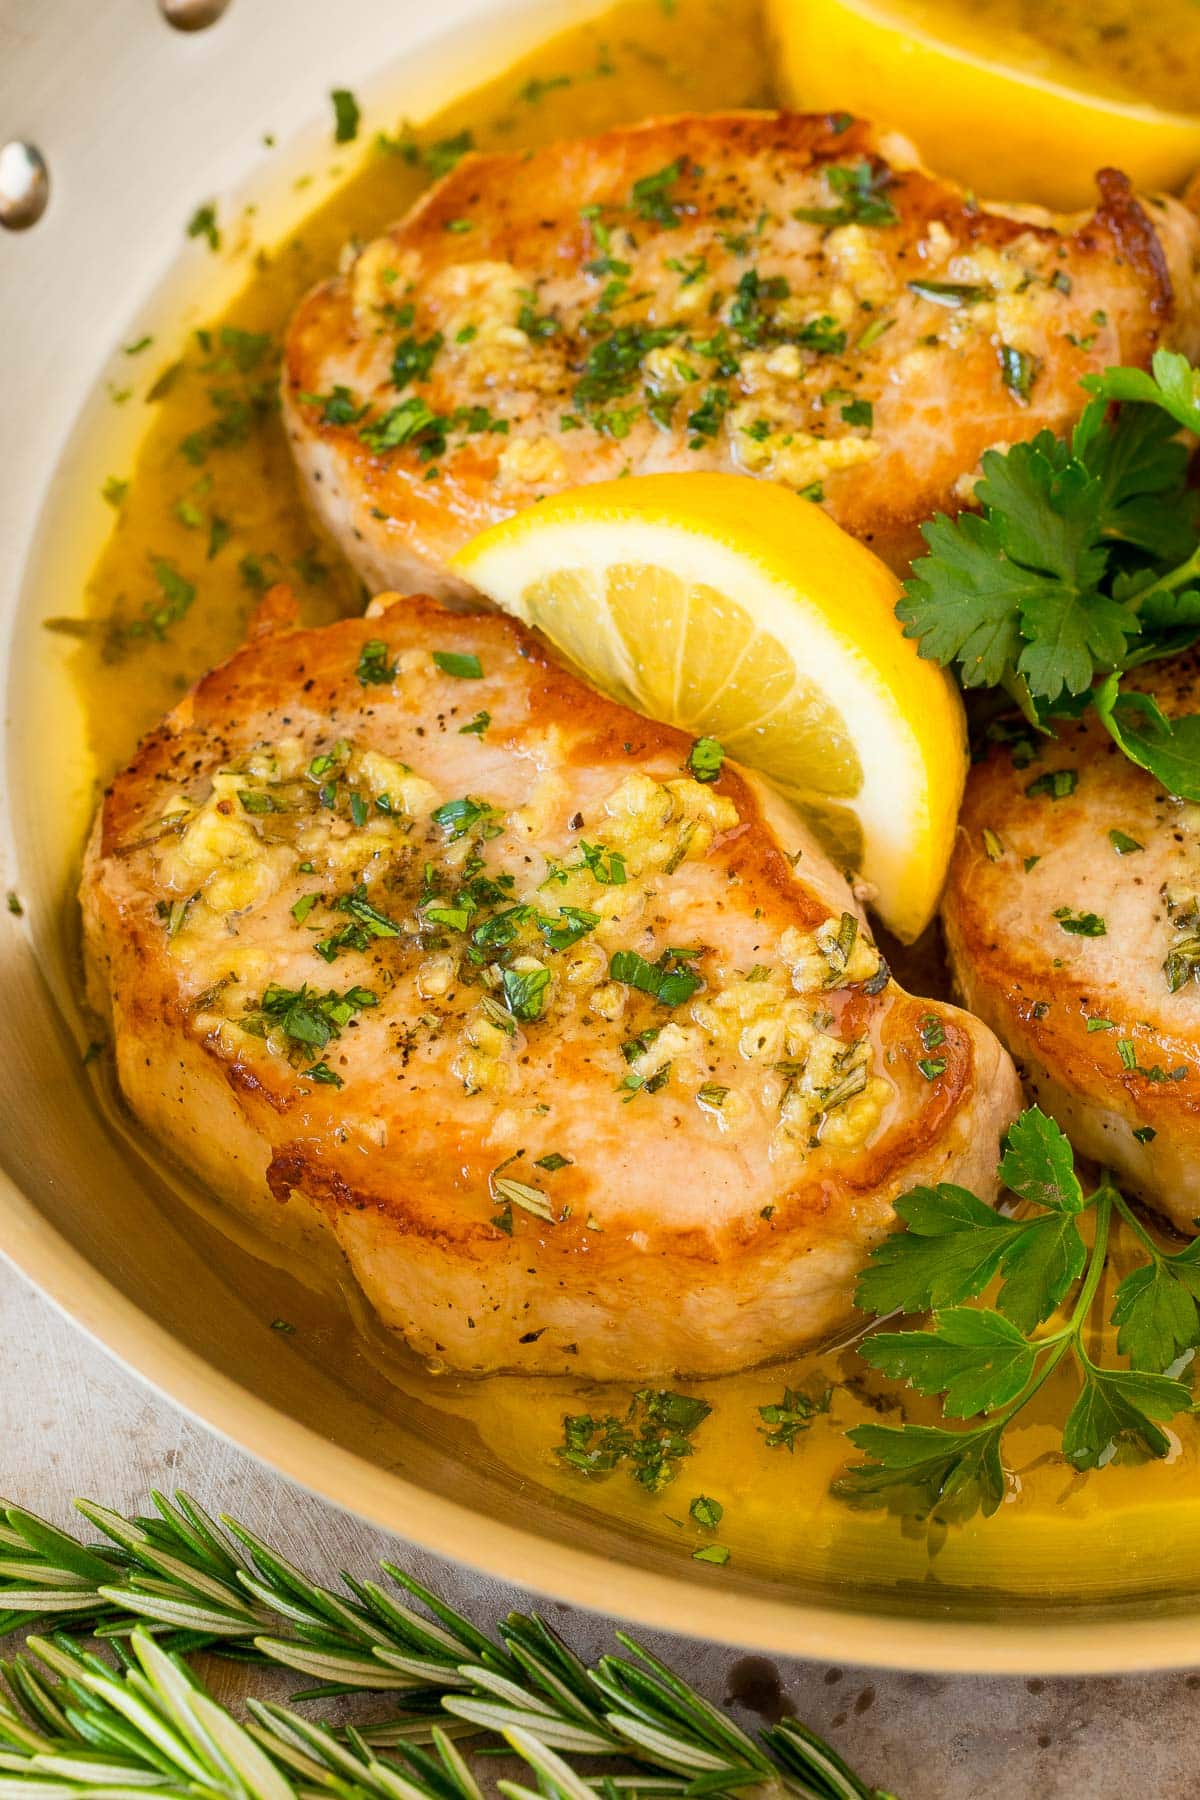 Baked boneless pork chops in a pan with lemon and parsley.